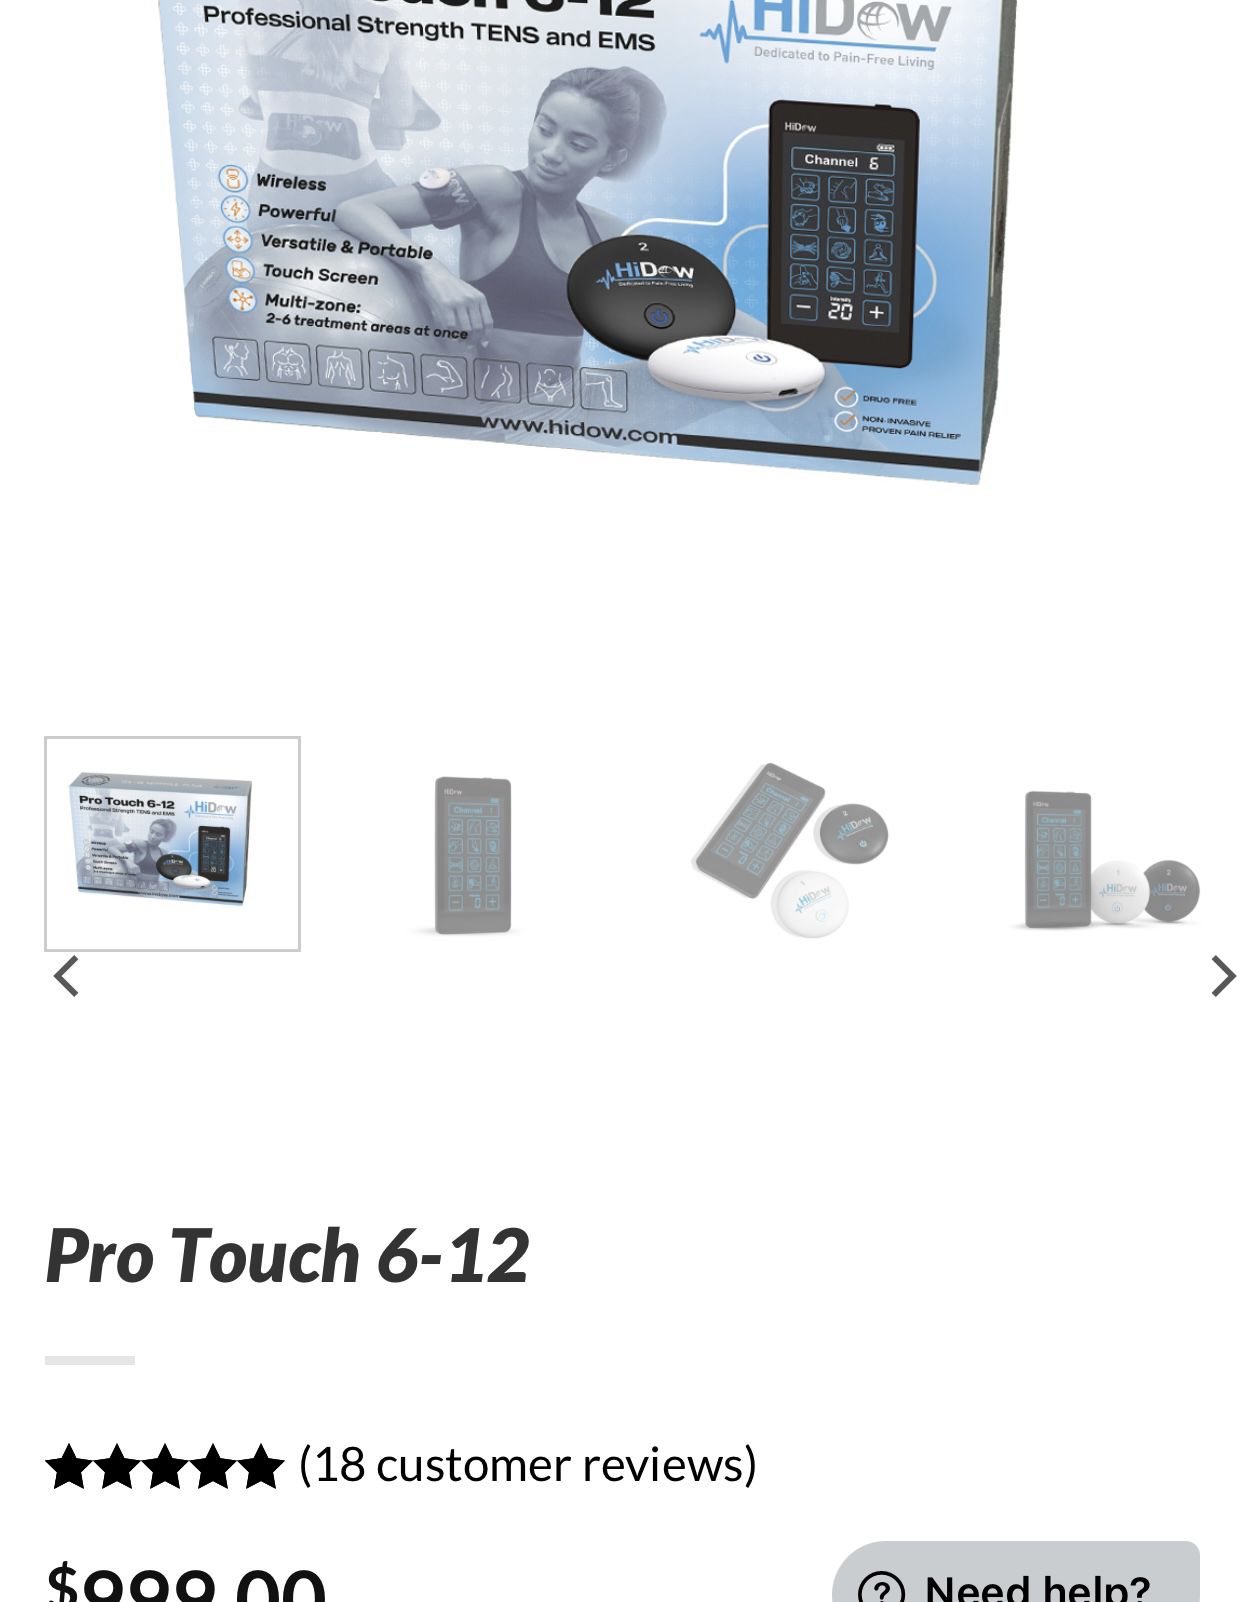 Introducing HiDow’s newest multi-stim model, the Pro Touch Wireless 6-12 is a premium electronic muscle stimulator without the hassle of wires.  Now y